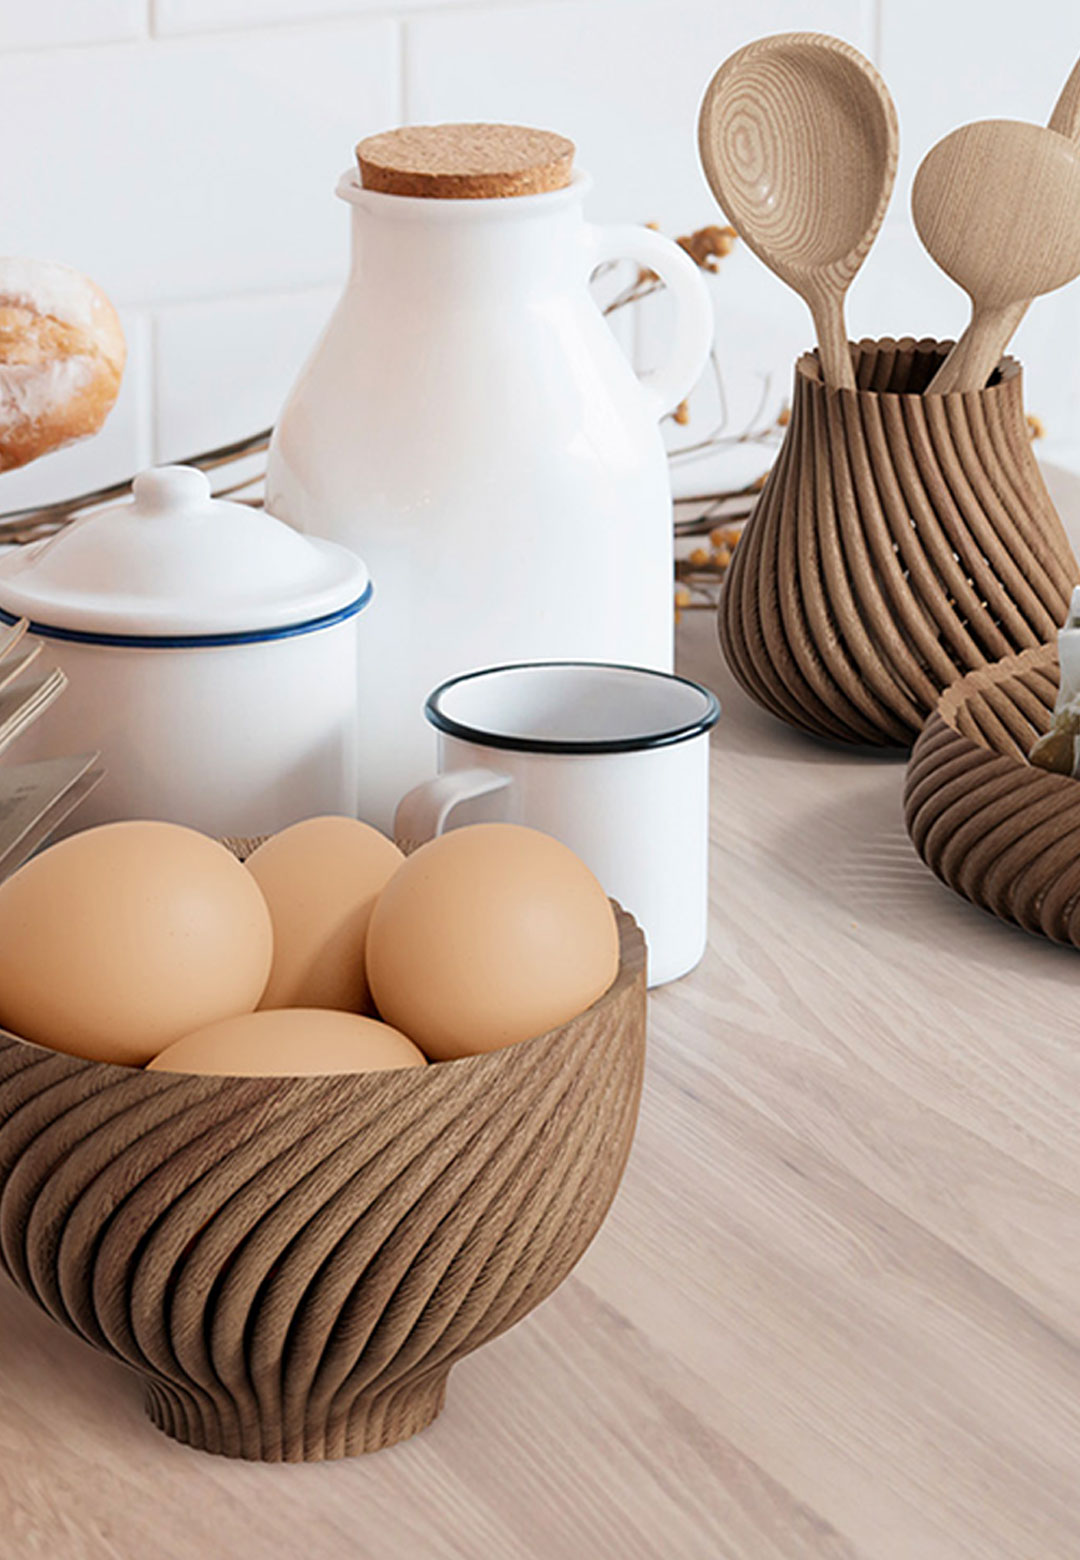 The ‘Vine’ homeware collection by fuseproject is 3D-printed from wood waste